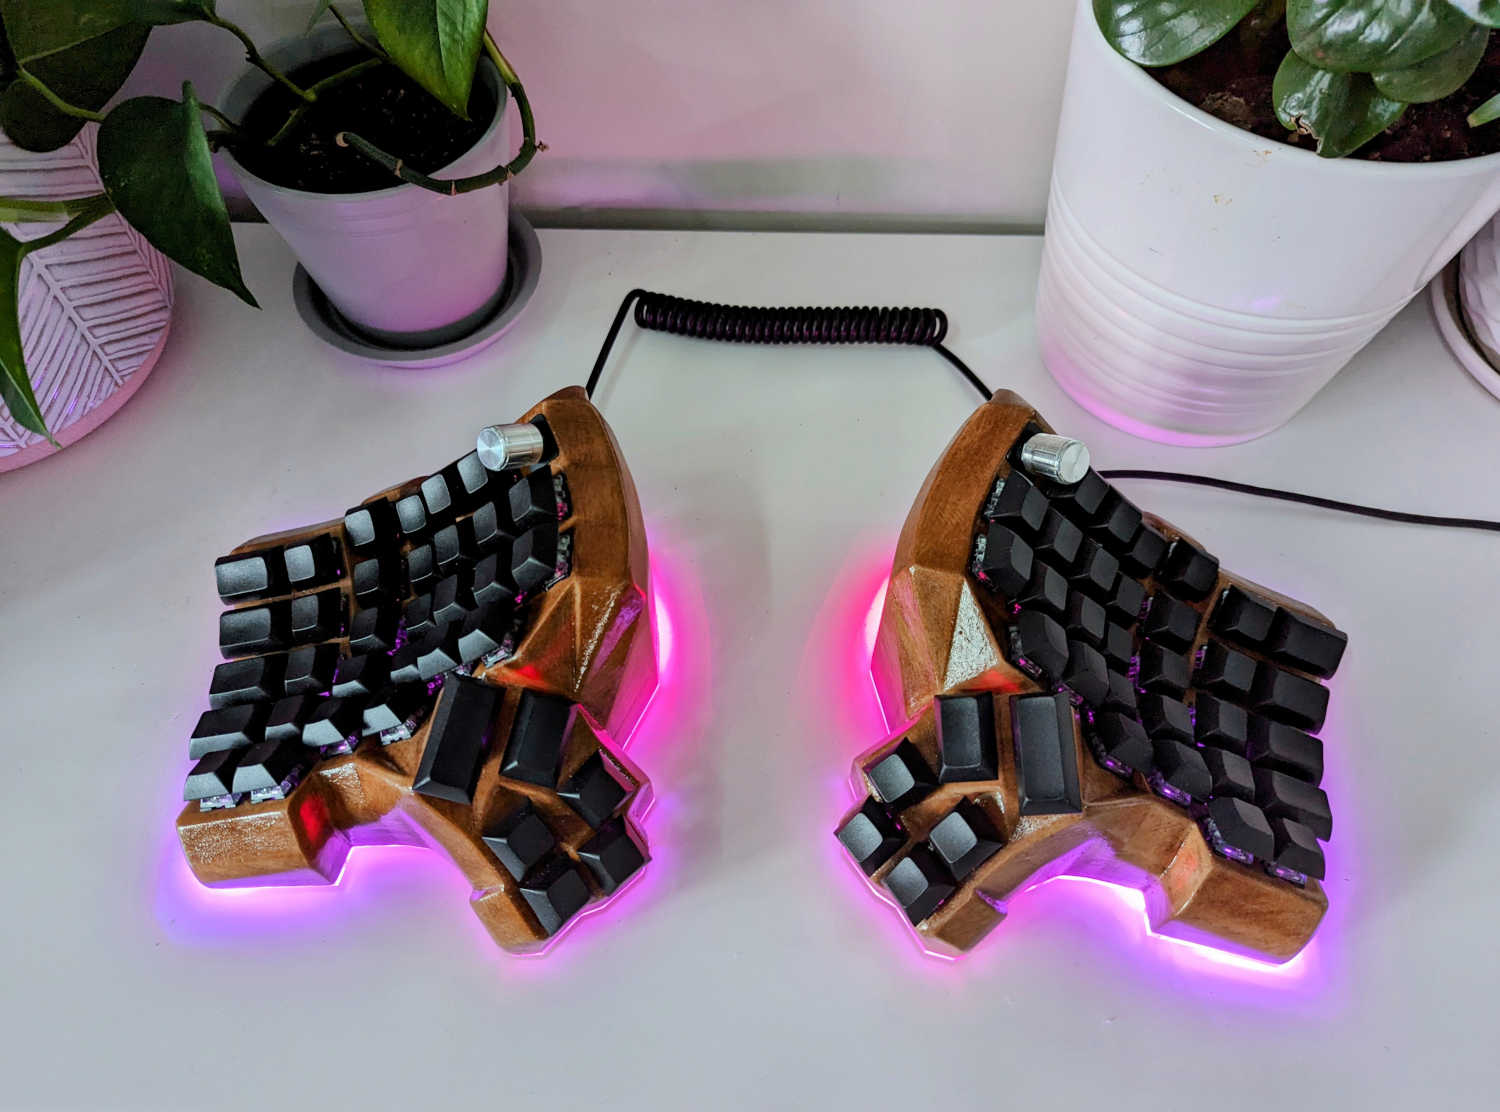 Another picture of the finished keyboard, with pink underglow